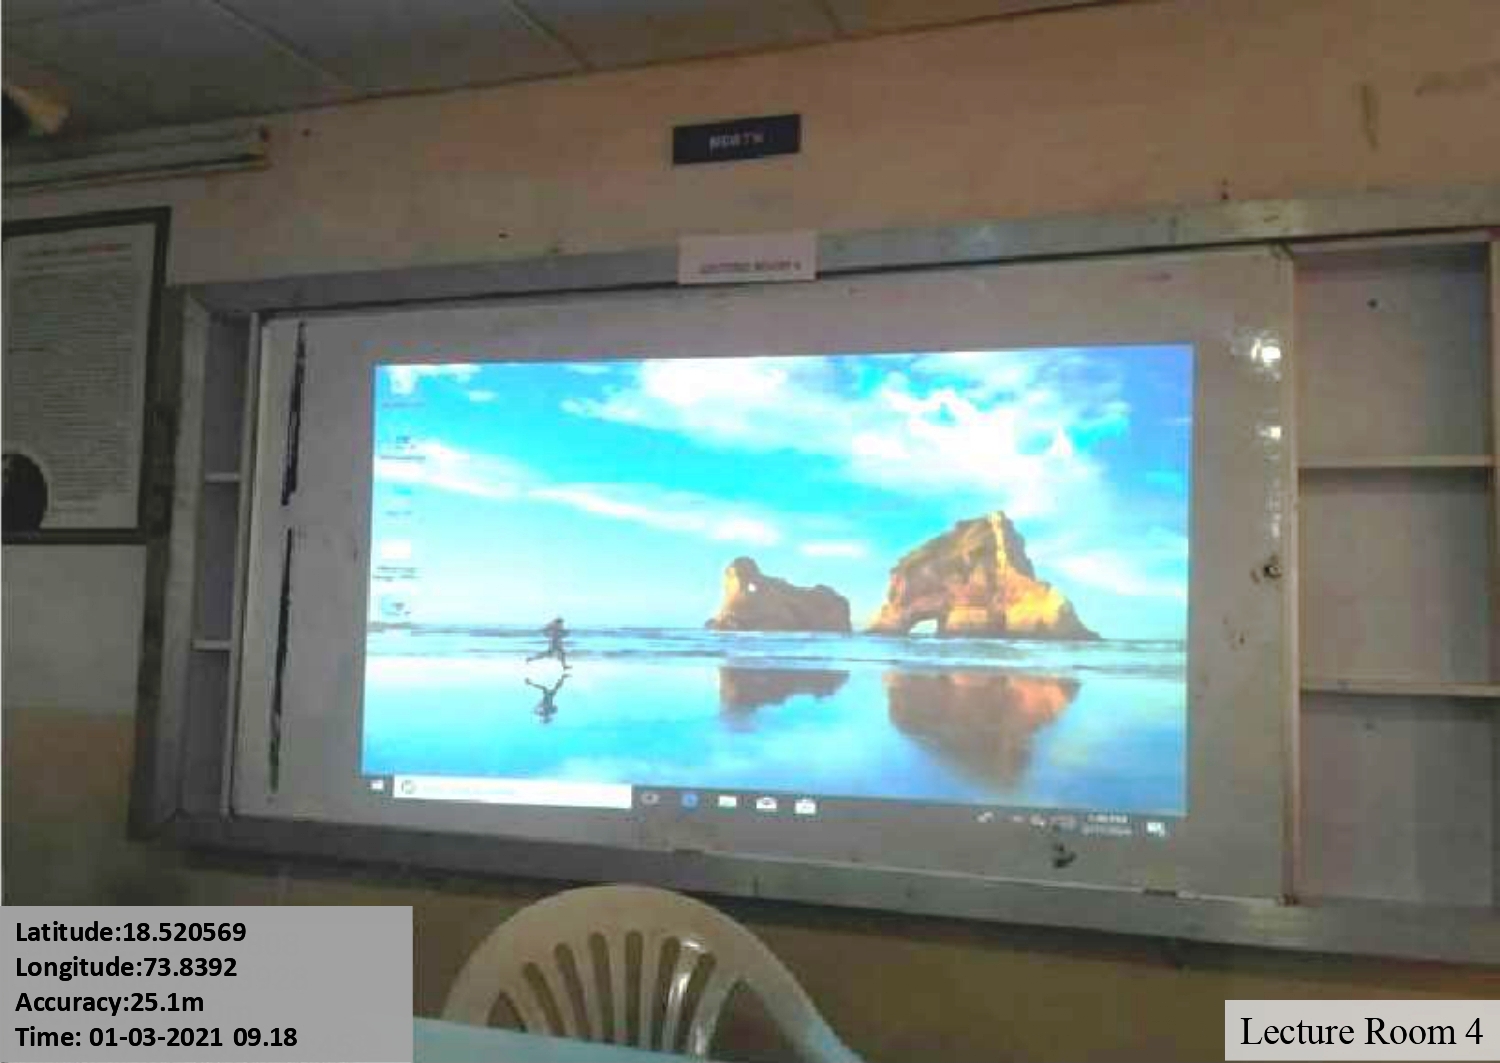 Lecture Room 4